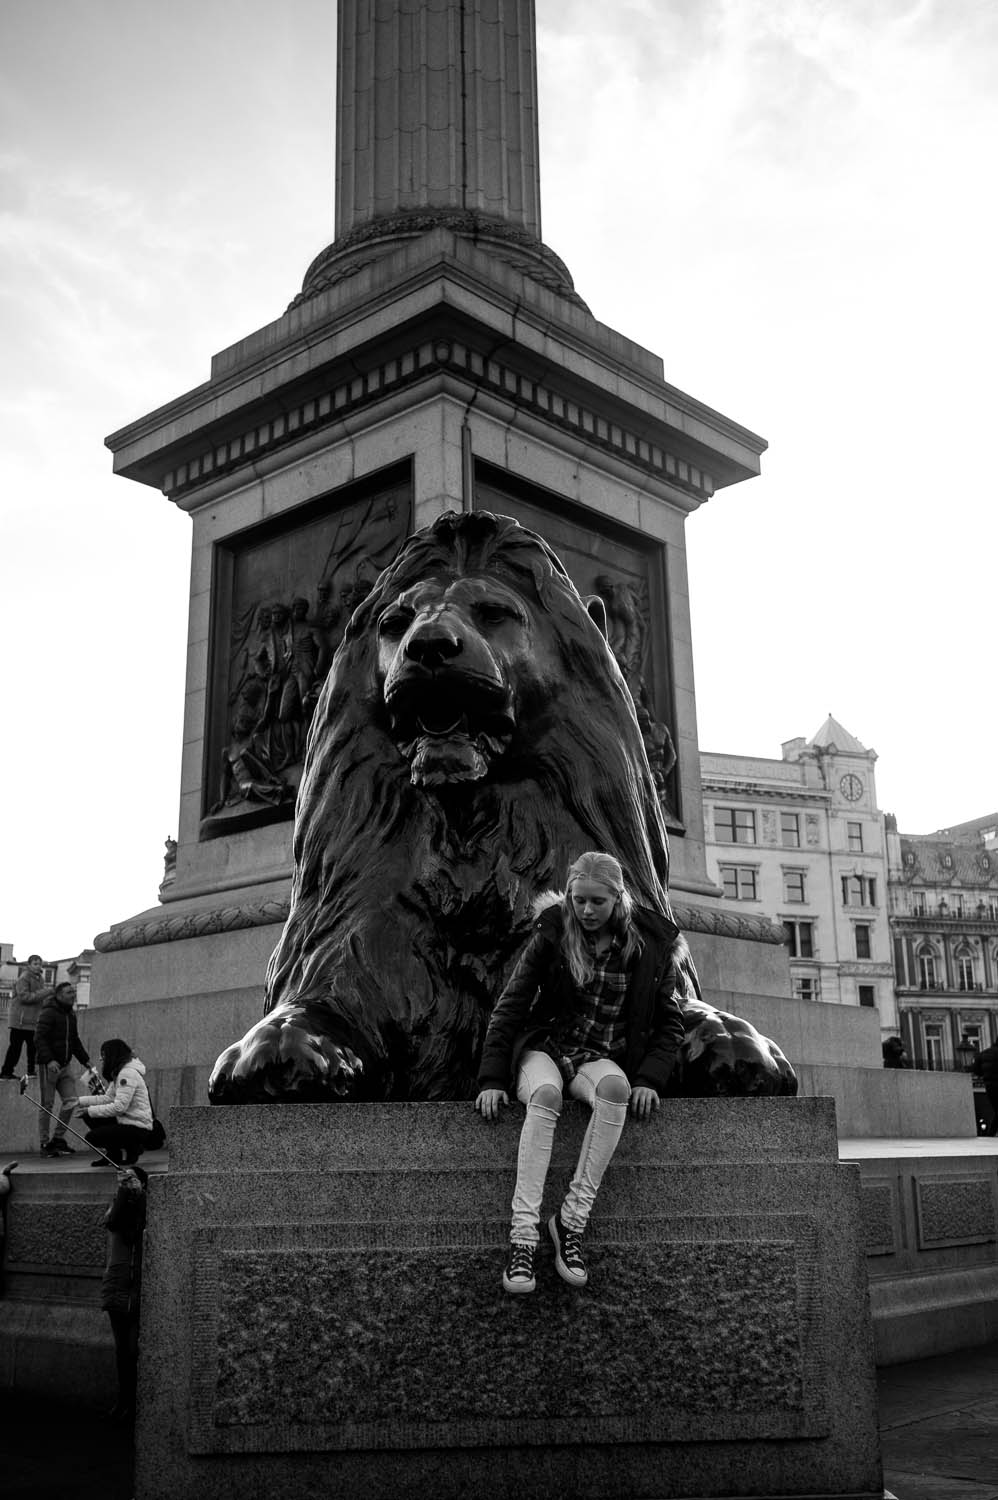 A girl sites in front of a lion statue in London